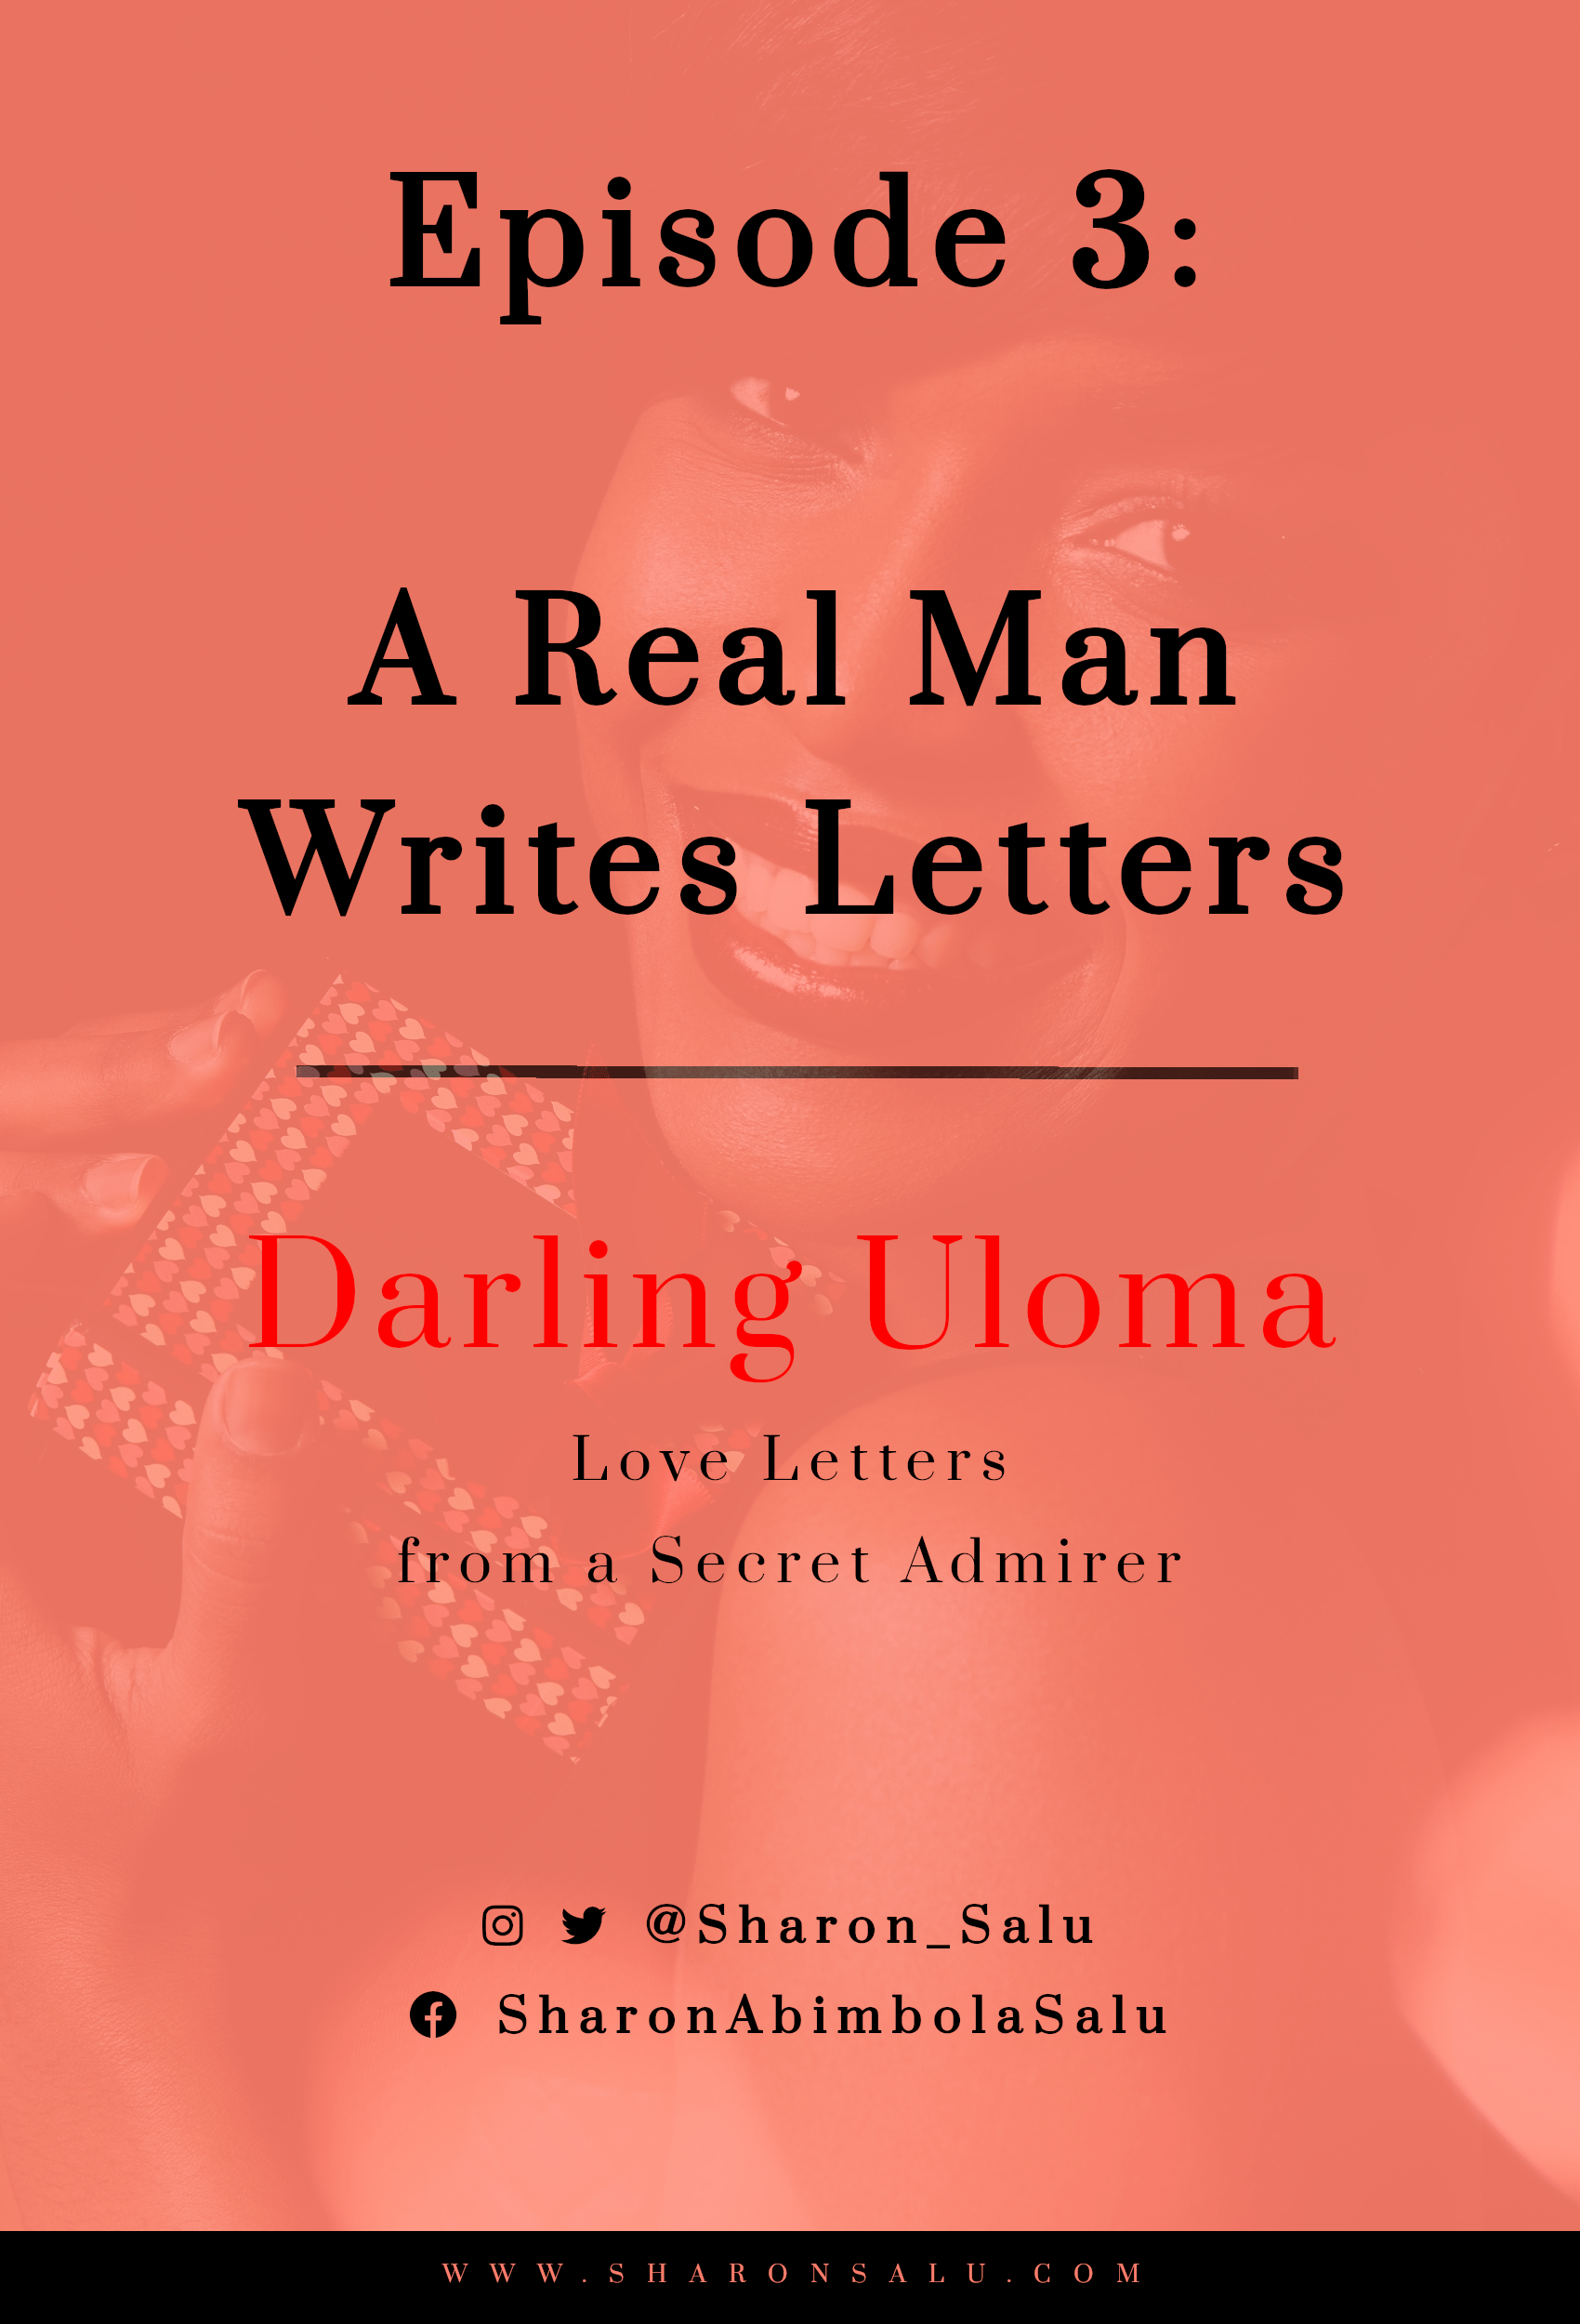 Episode 3 A Real Man Writes Letters - Darling Uloma - Love Letters from a Secret Admirer